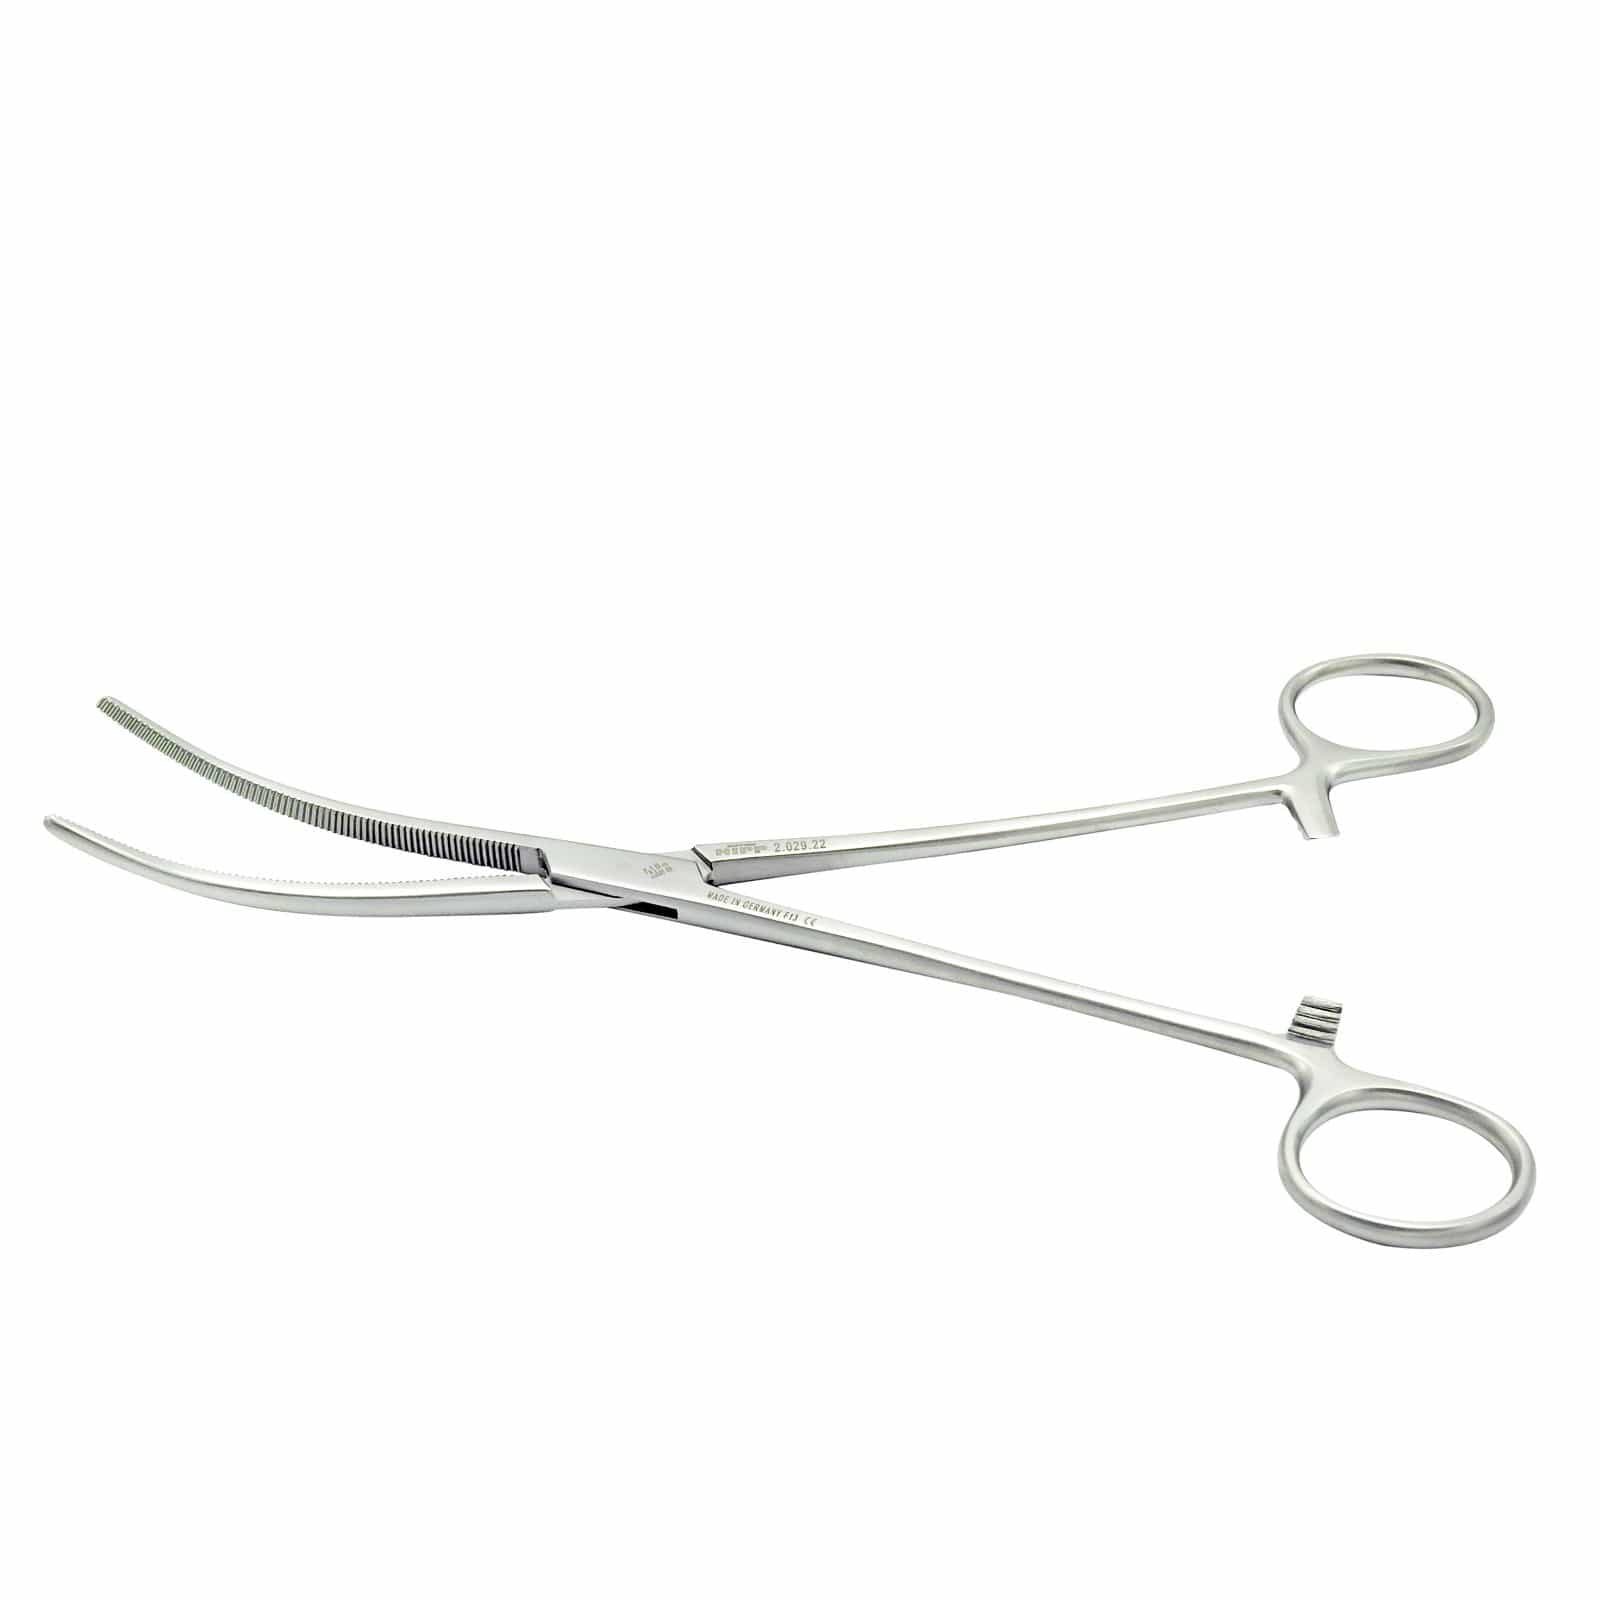 Hipp Surgical Instruments 22cm / Curved Hipp Rochester Pean Forceps